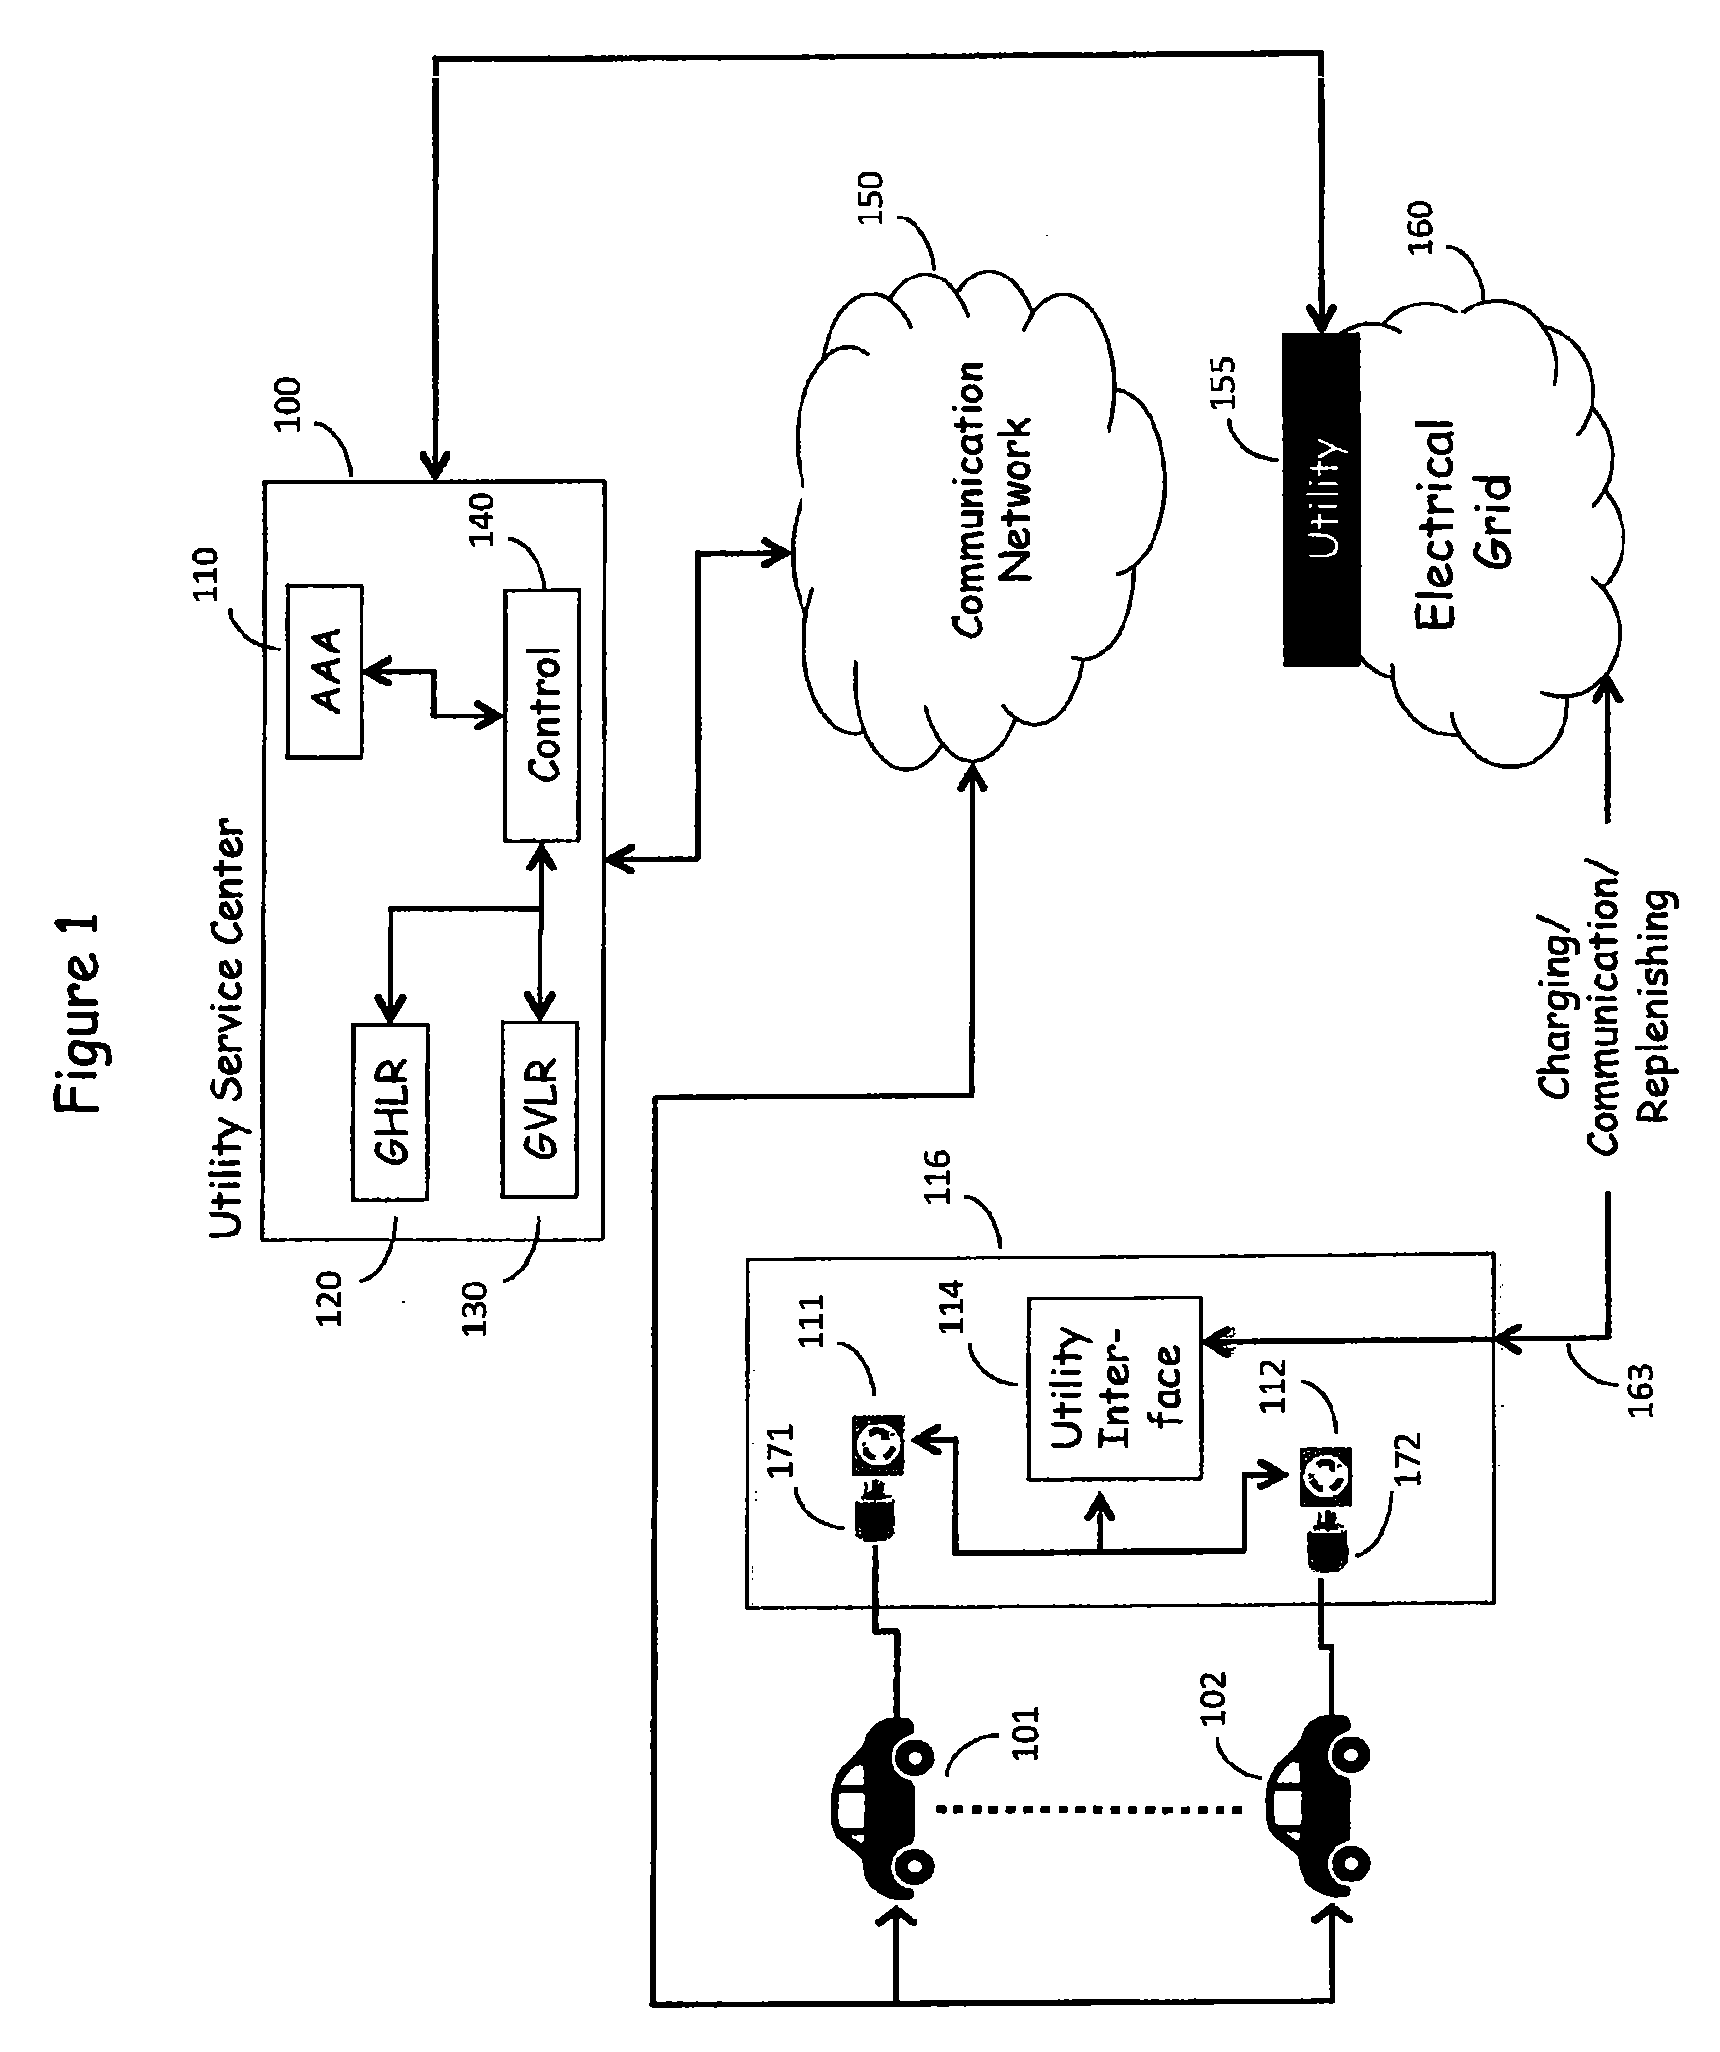 Intra-vehicle charging system for use in recharging vehicles equipped with electrically powered propulsion systems